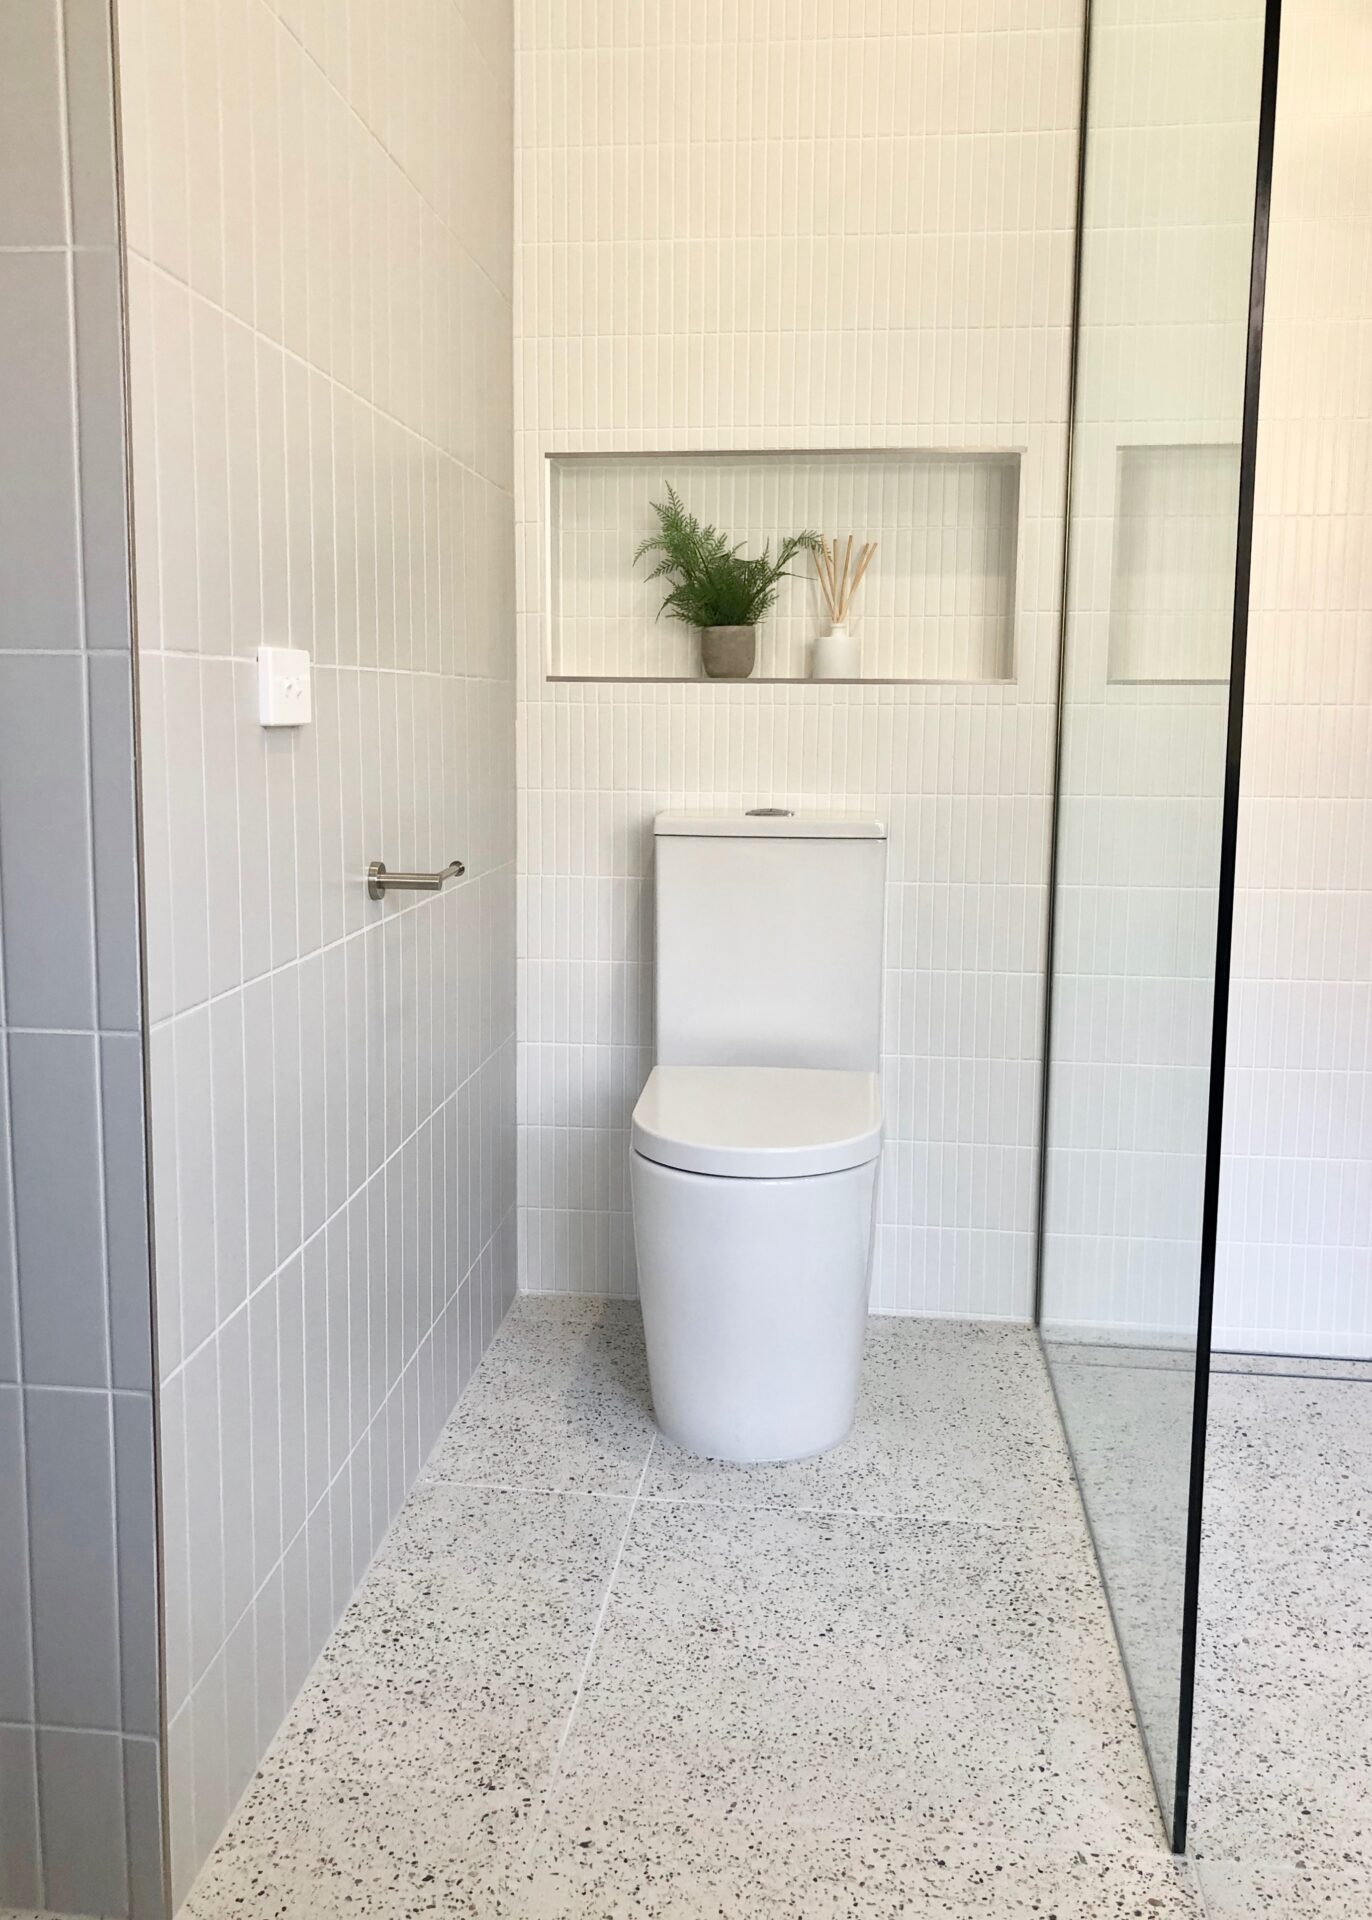 toilet in a white tiled bathroom with a plant vase and shower glass.